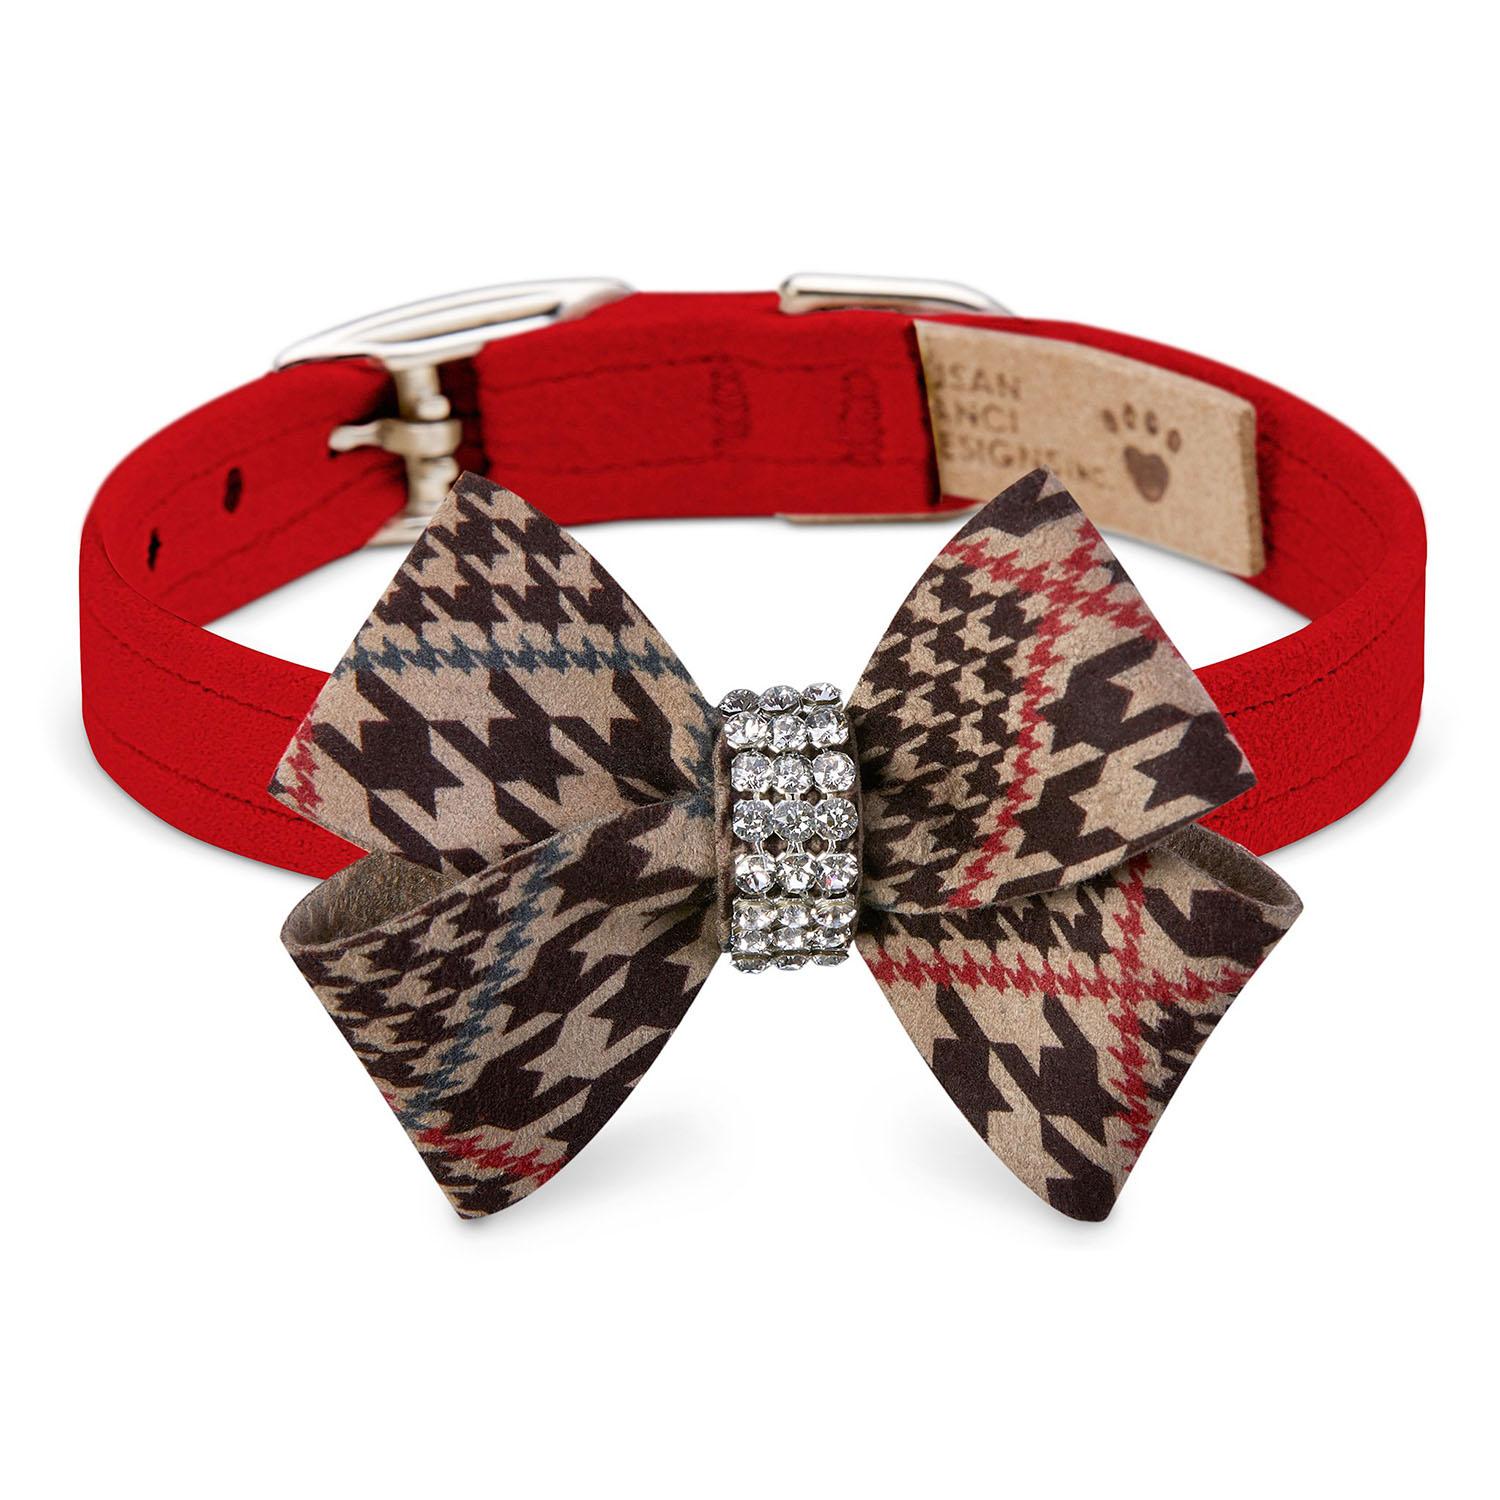 Chocolate Glen Houndstooth Nouveau Bow Luxury Dog Collar by Susan Lanci - Red